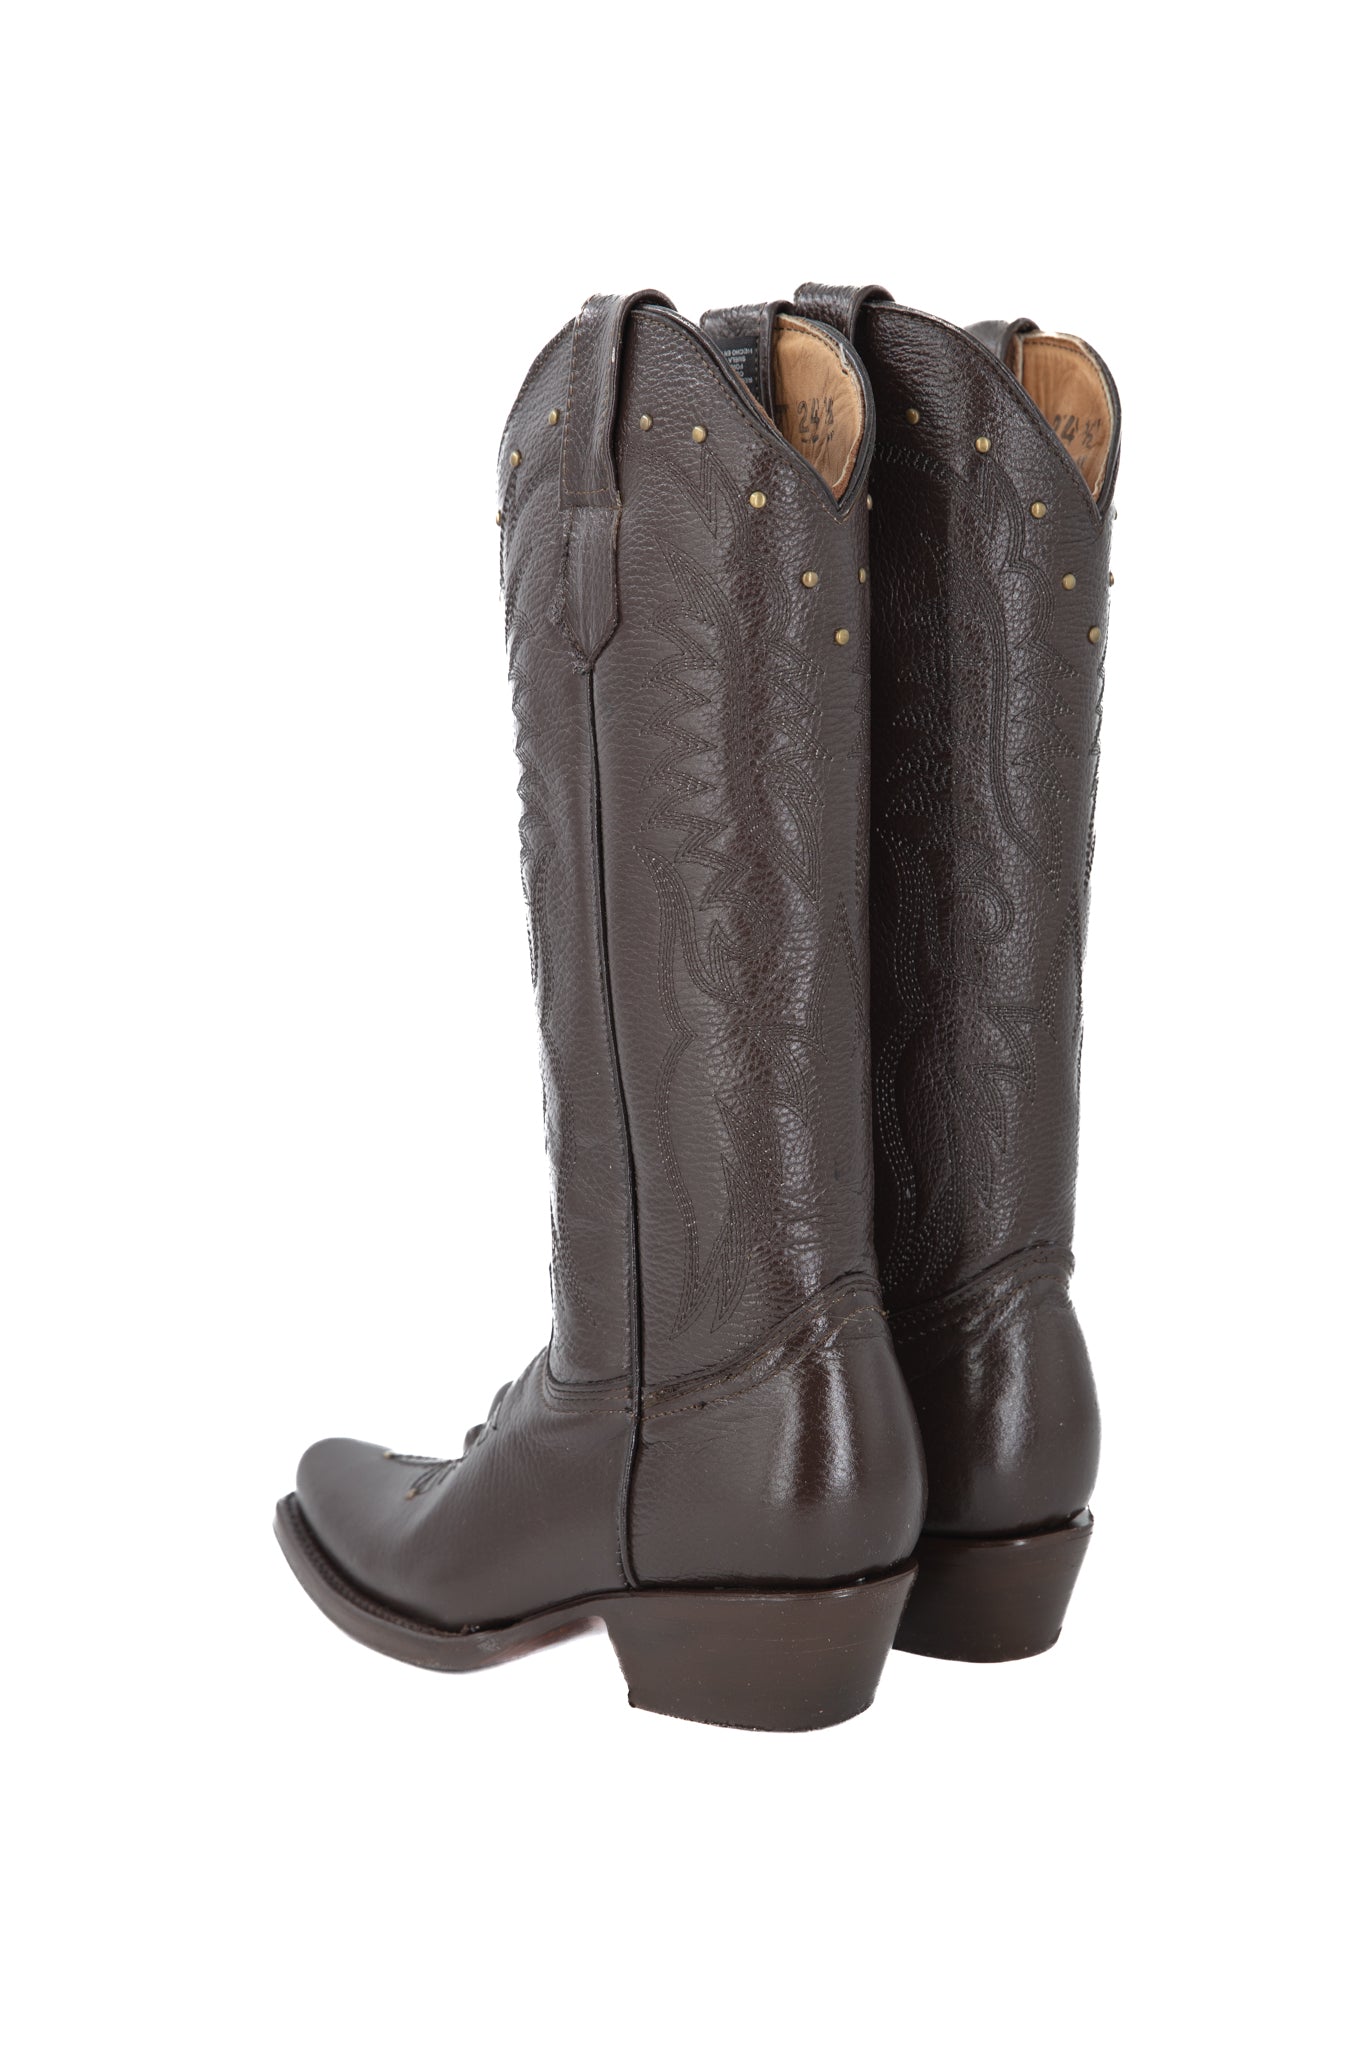 The Tania Country Tall Cowgirl Boot FINAL SALE